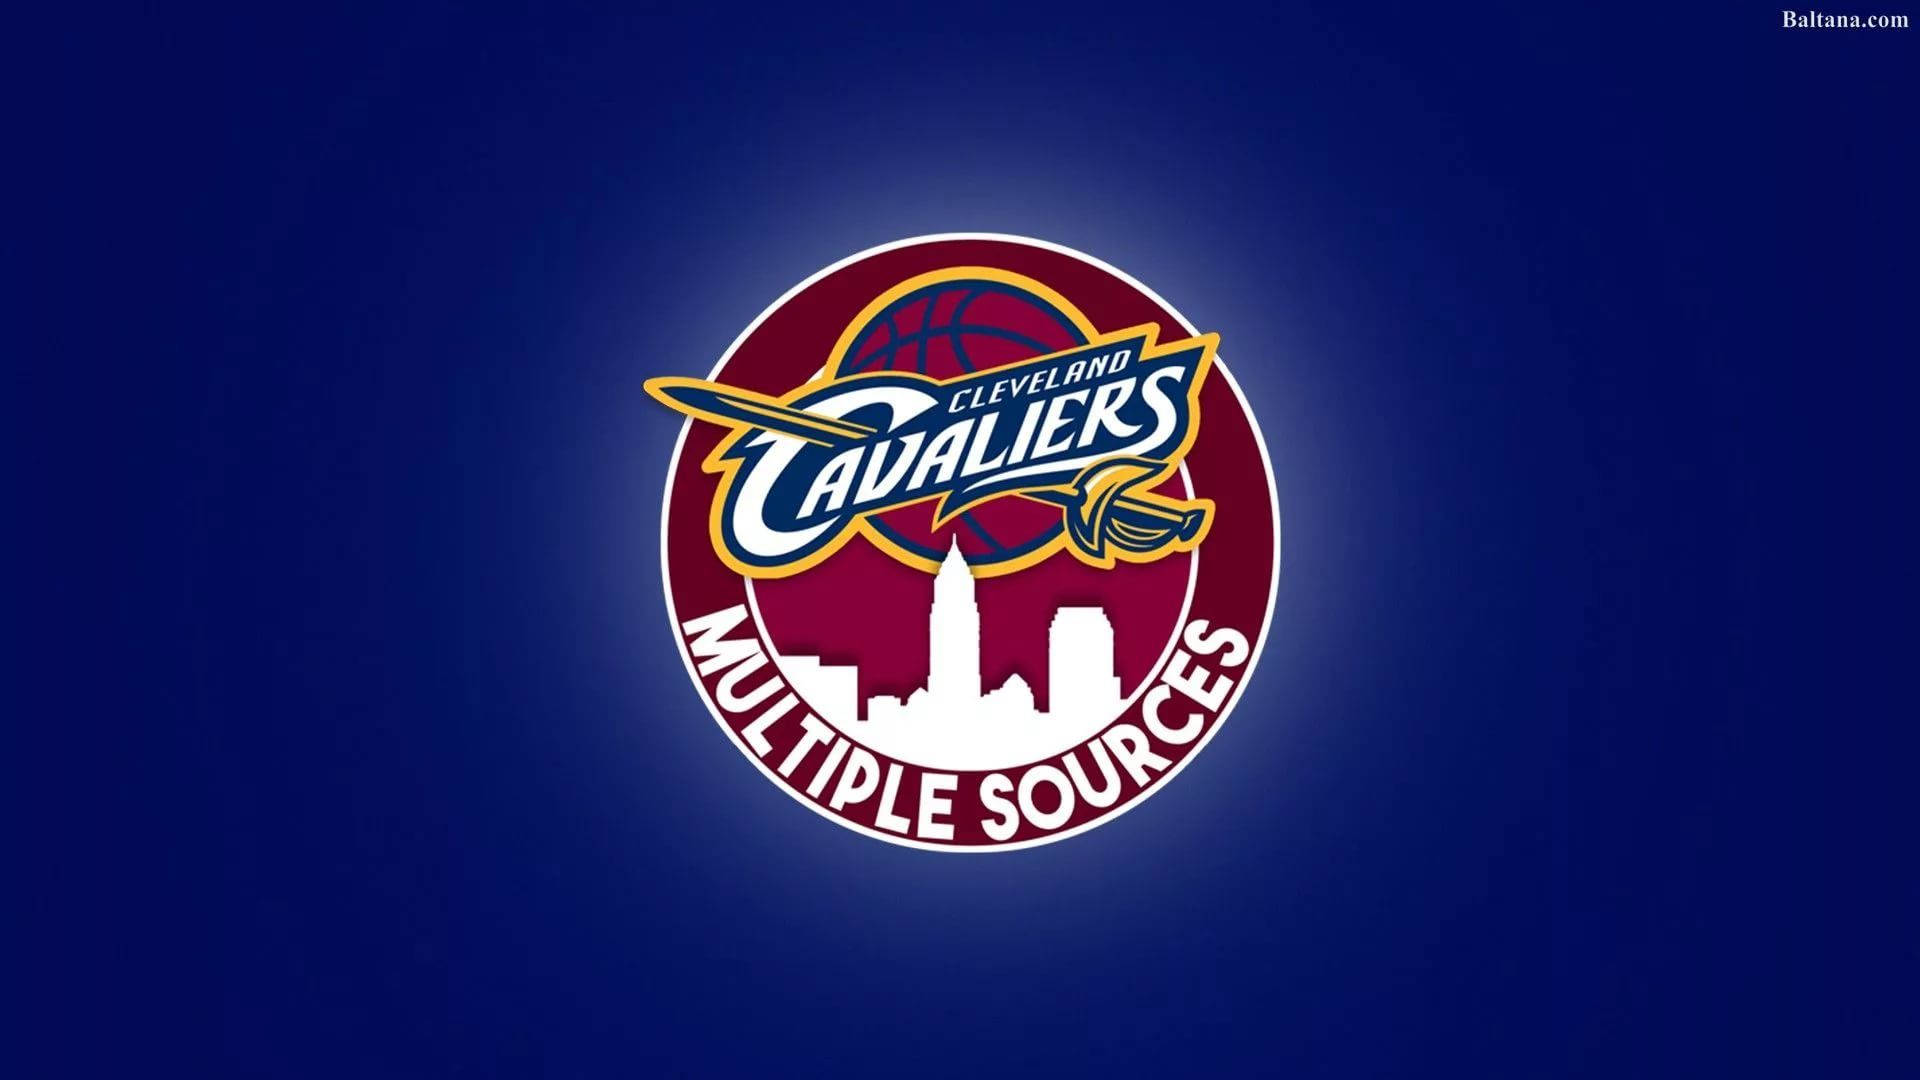 Cleveland Cavaliers City Outline Logo Background